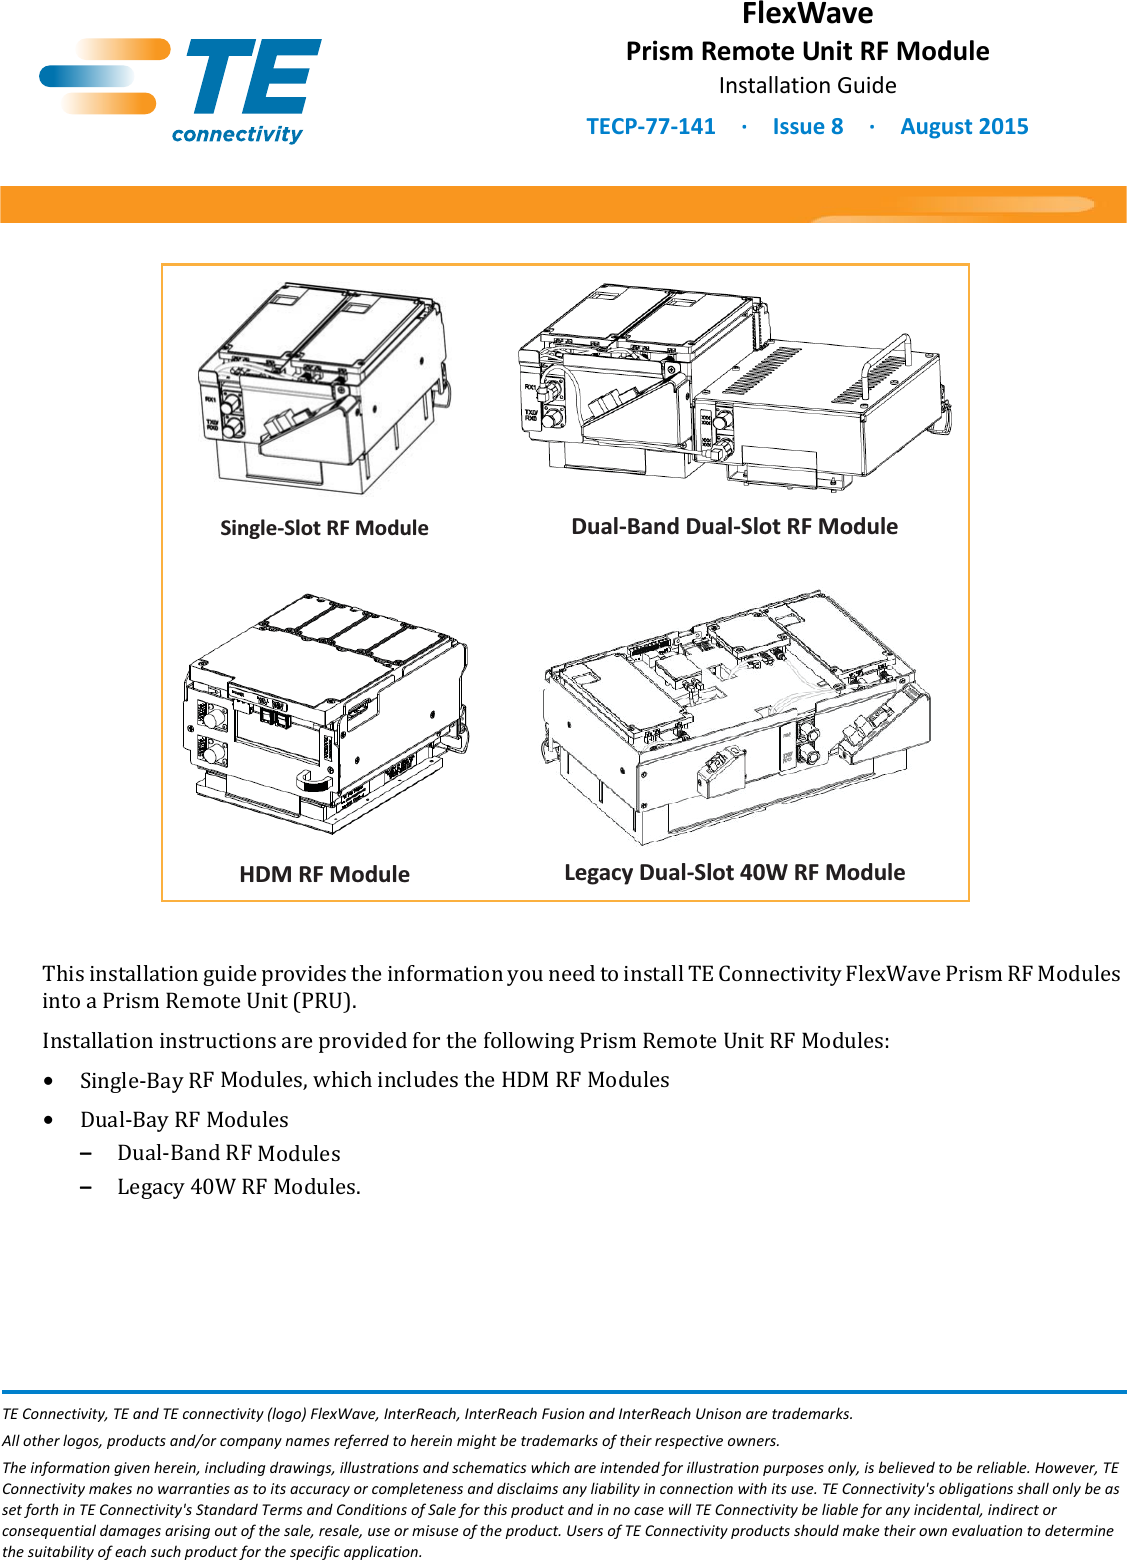 Dual-Band Dual-Slot RF ModuleSingle-Slot RF ModuleLegacy Dual-Slot 40W RF ModuleHDM RF ModuleFlexWavePrism Remote Unit RF ModuleInstallation GuideTECP-77-141 · Issue 8 · August 2015TE Connectivity, TE and TE connectivity (logo) FlexWave, InterReach, InterReach Fusion and InterReach Unison are trademarks. All other logos, products and/or company names referred to herein might be trademarks of their respective owners.The information given herein, including drawings, illustrations and schematics which are intended for illustration purposes only, is believed to be reliable. However, TE Connectivity makes no warranties as to its accuracy or completeness and disclaims any liability in connection with its use. TE Connectivity&apos;s obligations shall only be as set forth in TE Connectivity&apos;s Standard Terms and Conditions of Sale for this product and in no case will TE Connectivity be liable for any incidental, indirect or consequential damages arising out of the sale, resale, use or misuse of the product. Users of TE Connectivity products should make their own evaluation to determine the suitability of each such product for the specific application.This installation guide provides the information you need to install TE Connectivity FlexWave Prism RF Modules into a Prism Remote Unit (PRU). Installation instructions are provided for the following Prism Remote Unit RF Modules:•Single-Bay RF Modules, which includes the HDM RF Modules•Dual-Bay RF Modules–Dual-Band RF Modules–Legacy 40W RF Modules.